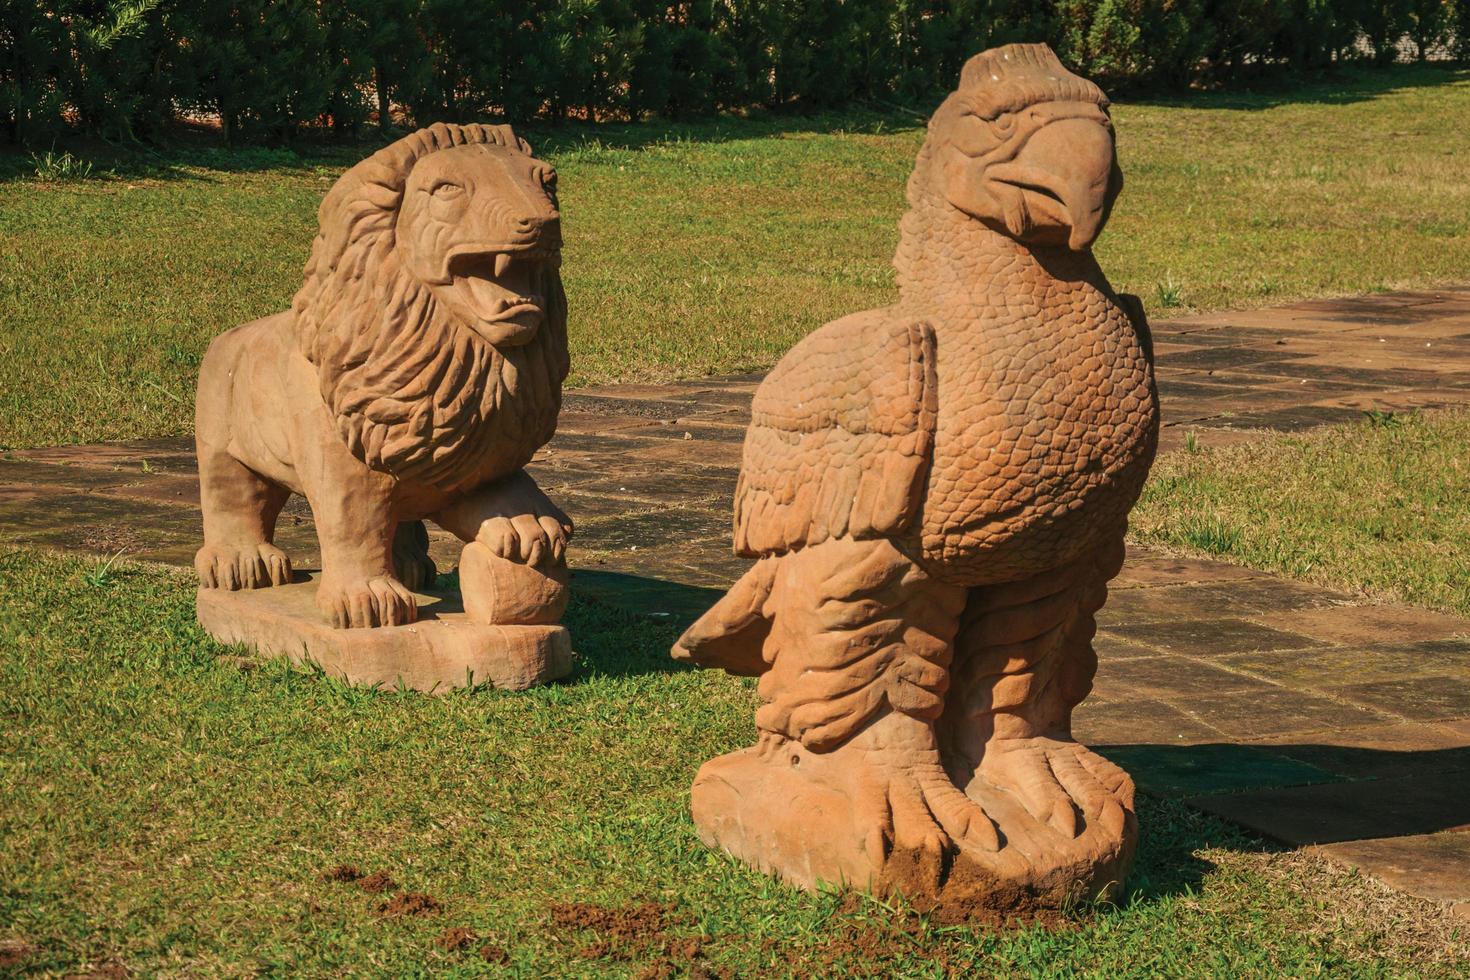 Nova Petropolis, Brazil - July 20, 2019. Sandstone sculptures of a lion and eagle at the Sculpture Park Stones of Silence near Nova Petropolis. A lovely rural town founded by German immigrants. photo